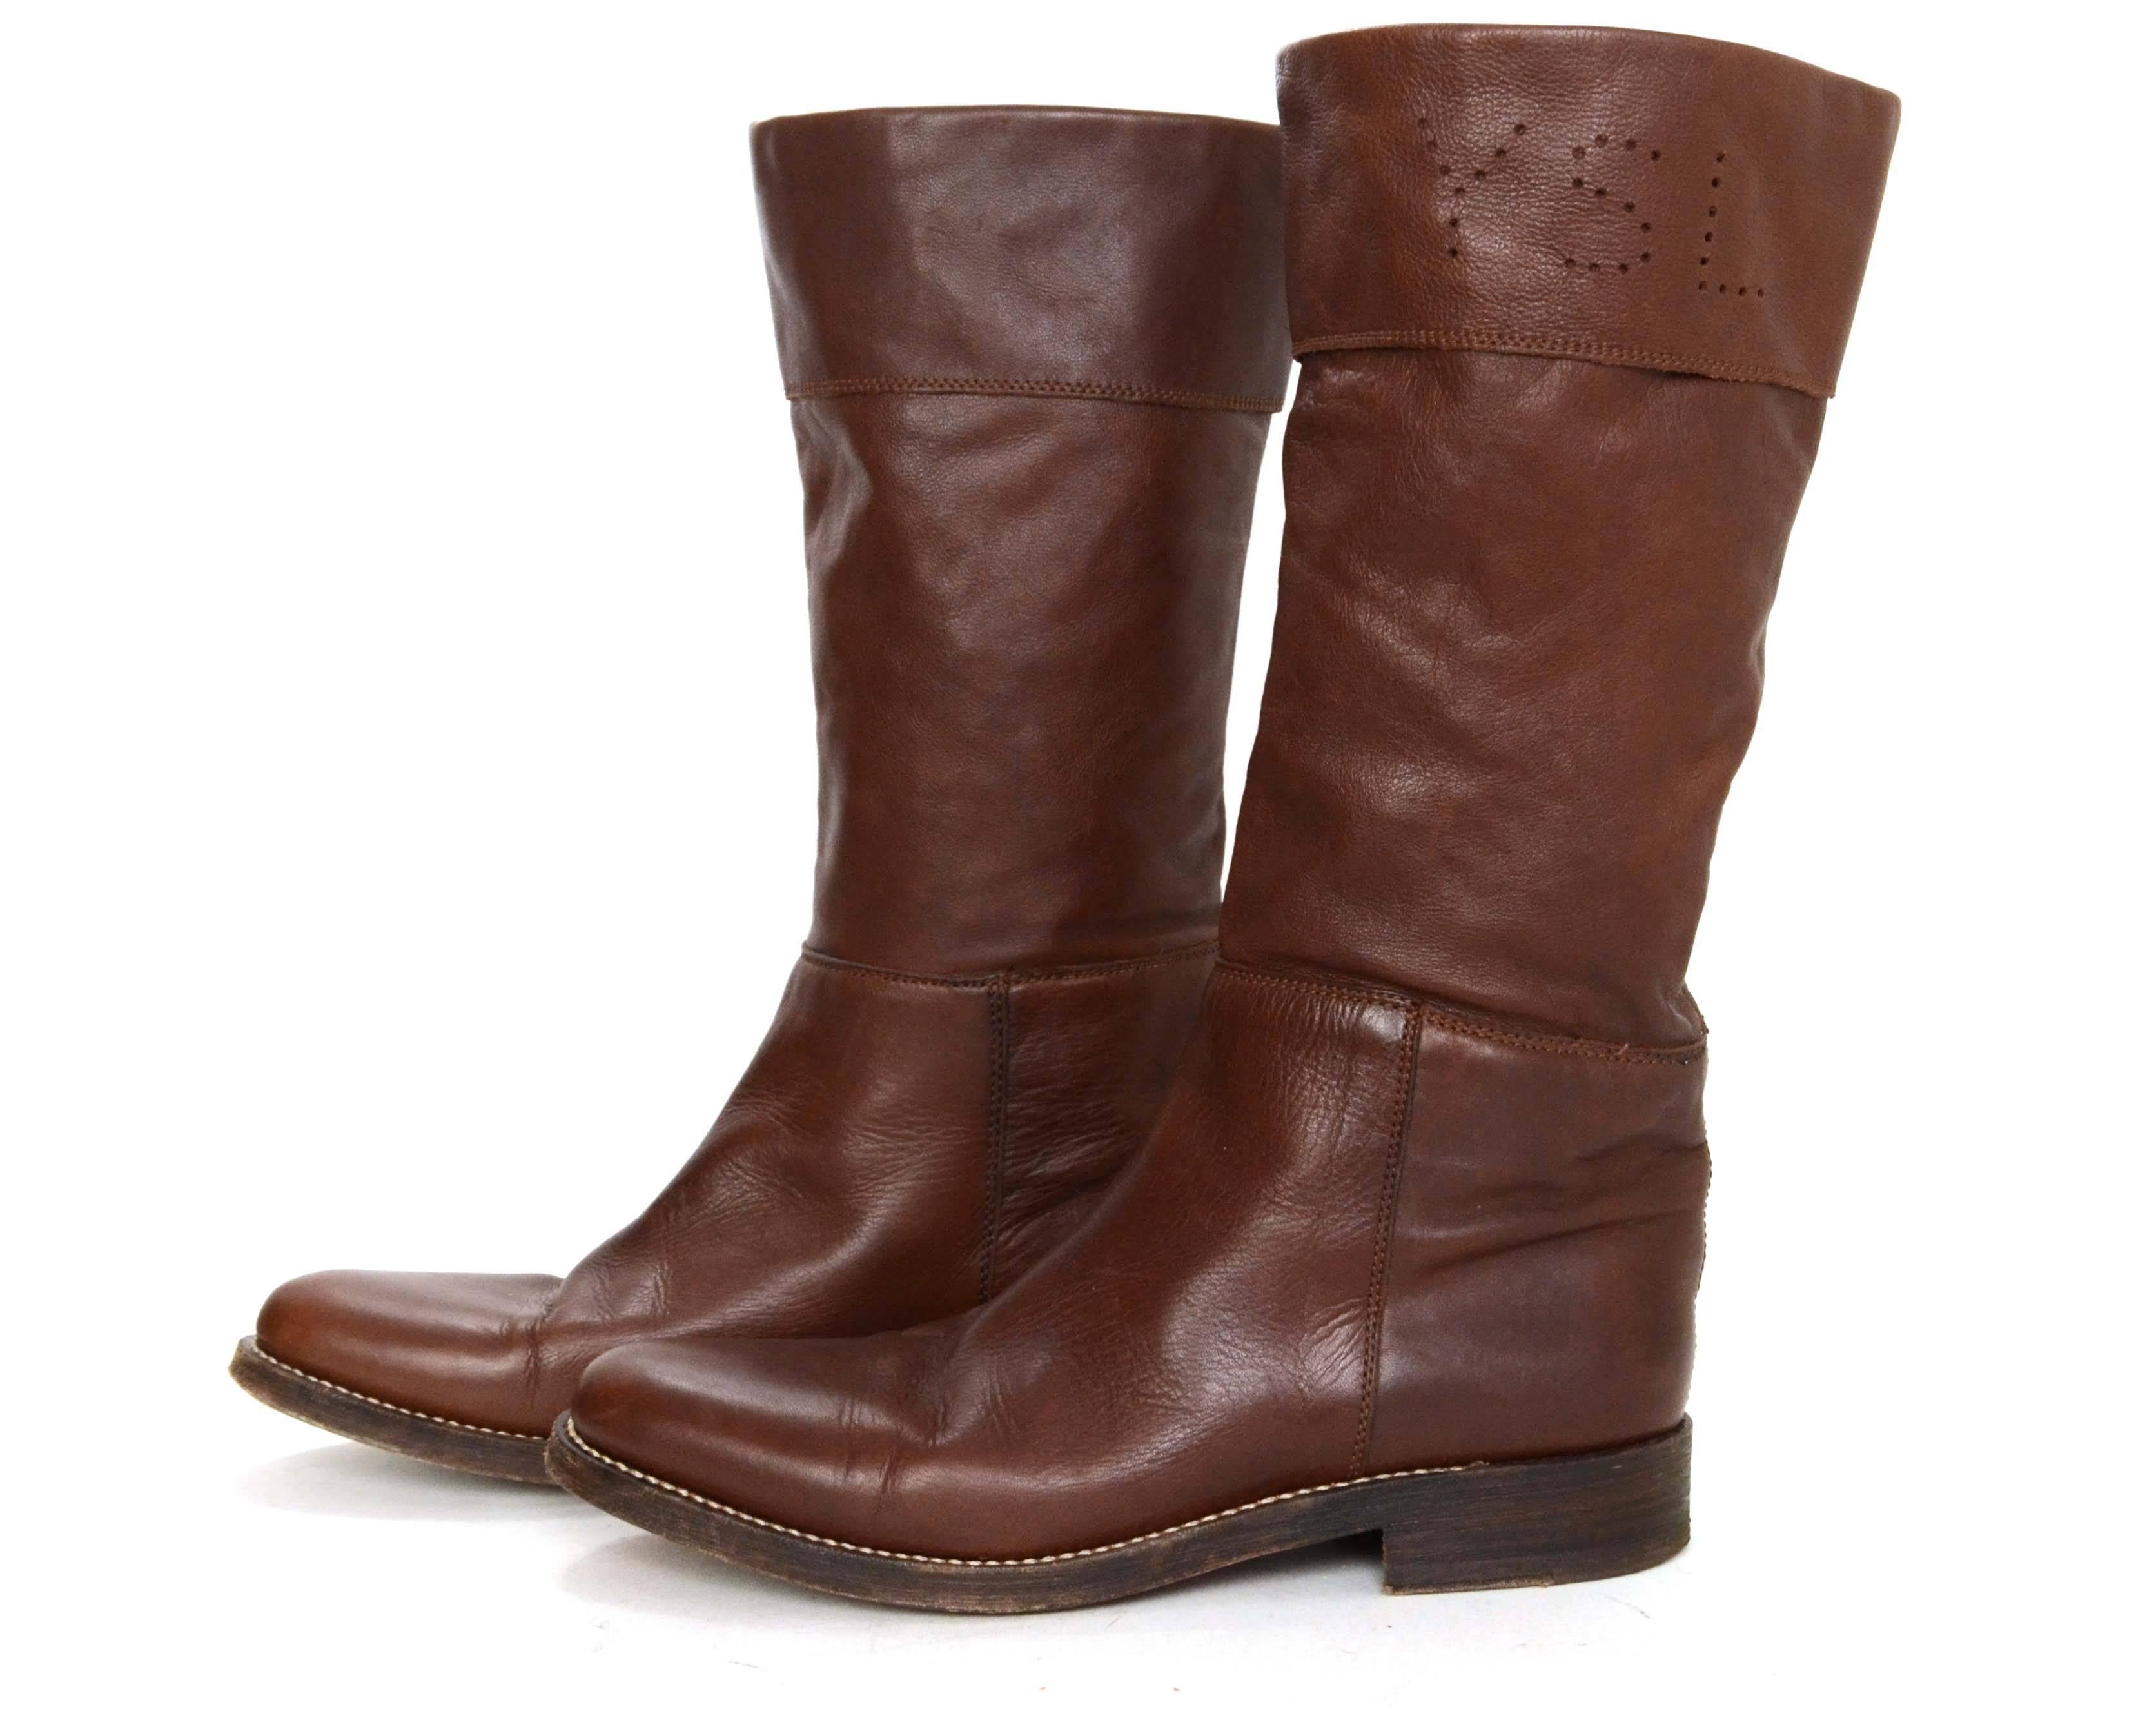 Yves Saint Laurent YSL Brown Leather Boots 
Features perforated logo on top side
Made In: Spain
Color: Brown
Composition: Leather
Closure/Opening: Pull on
Sole Stamp: Yves Saint Laurent a rive gauche Made in Spain Cuir Veritable 40